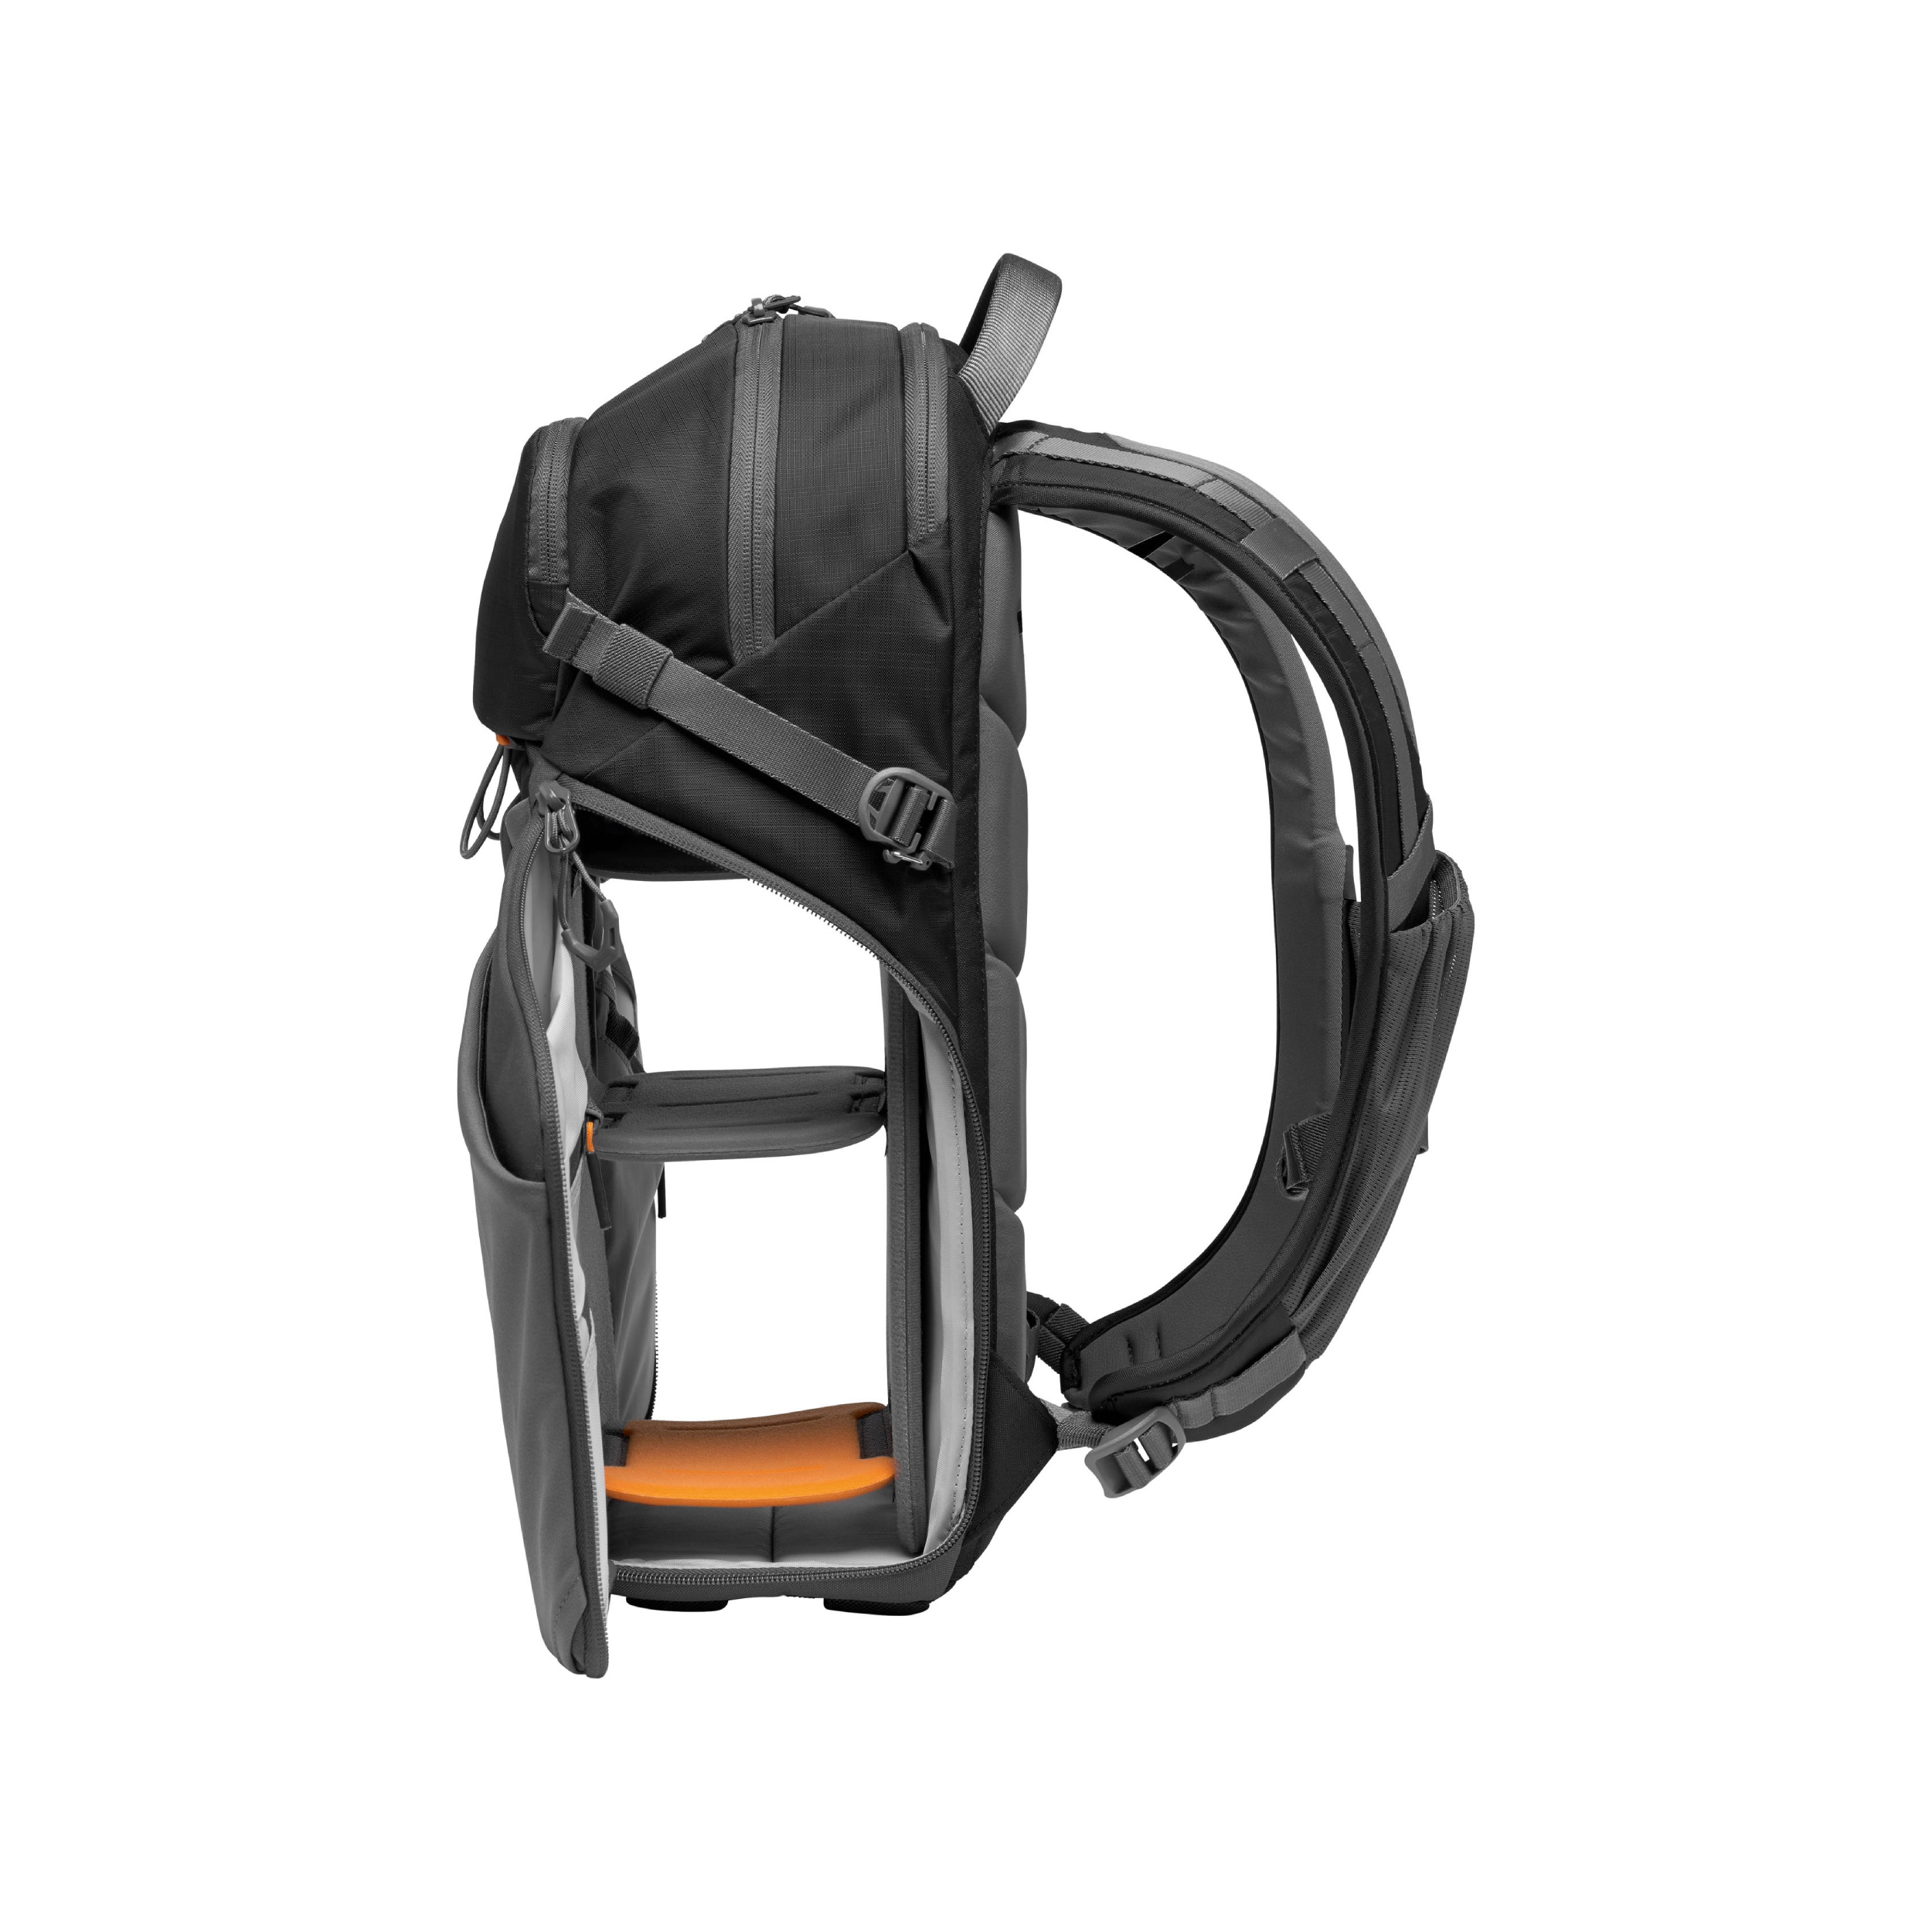 Lowepro Photo Active BP Backpack - 200 AW - Black